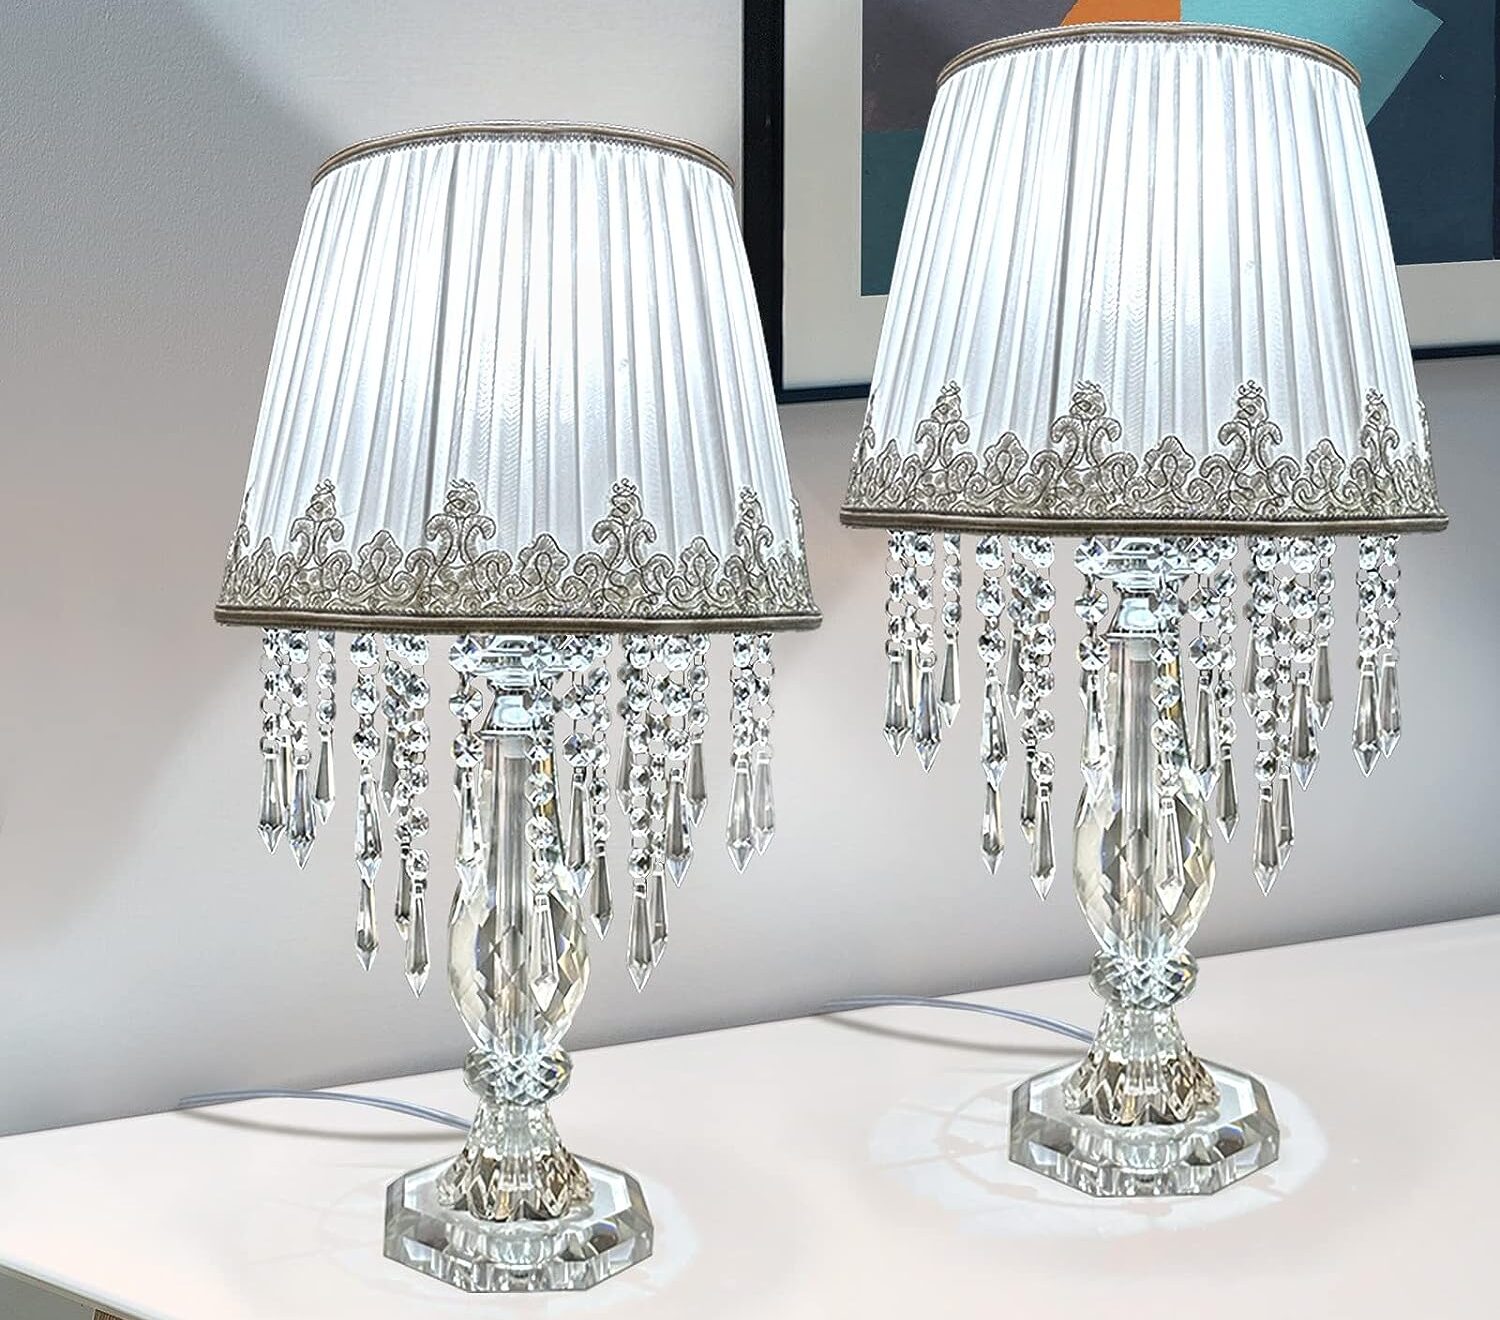 Read more about the article Chandelier Table Lamp: Revealing Elegance